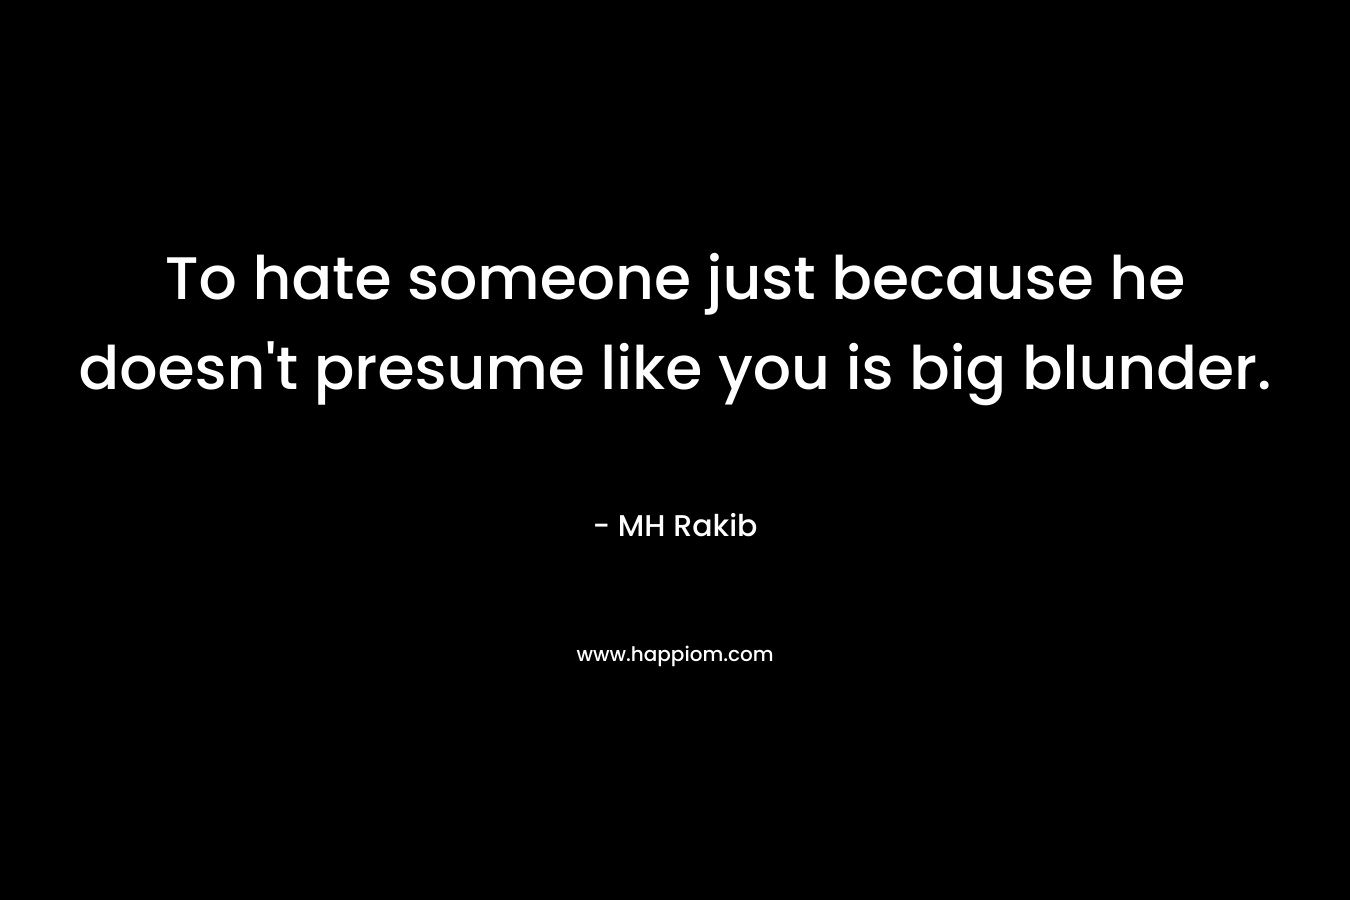 To hate someone just because he doesn’t presume like you is big blunder. – MH Rakib